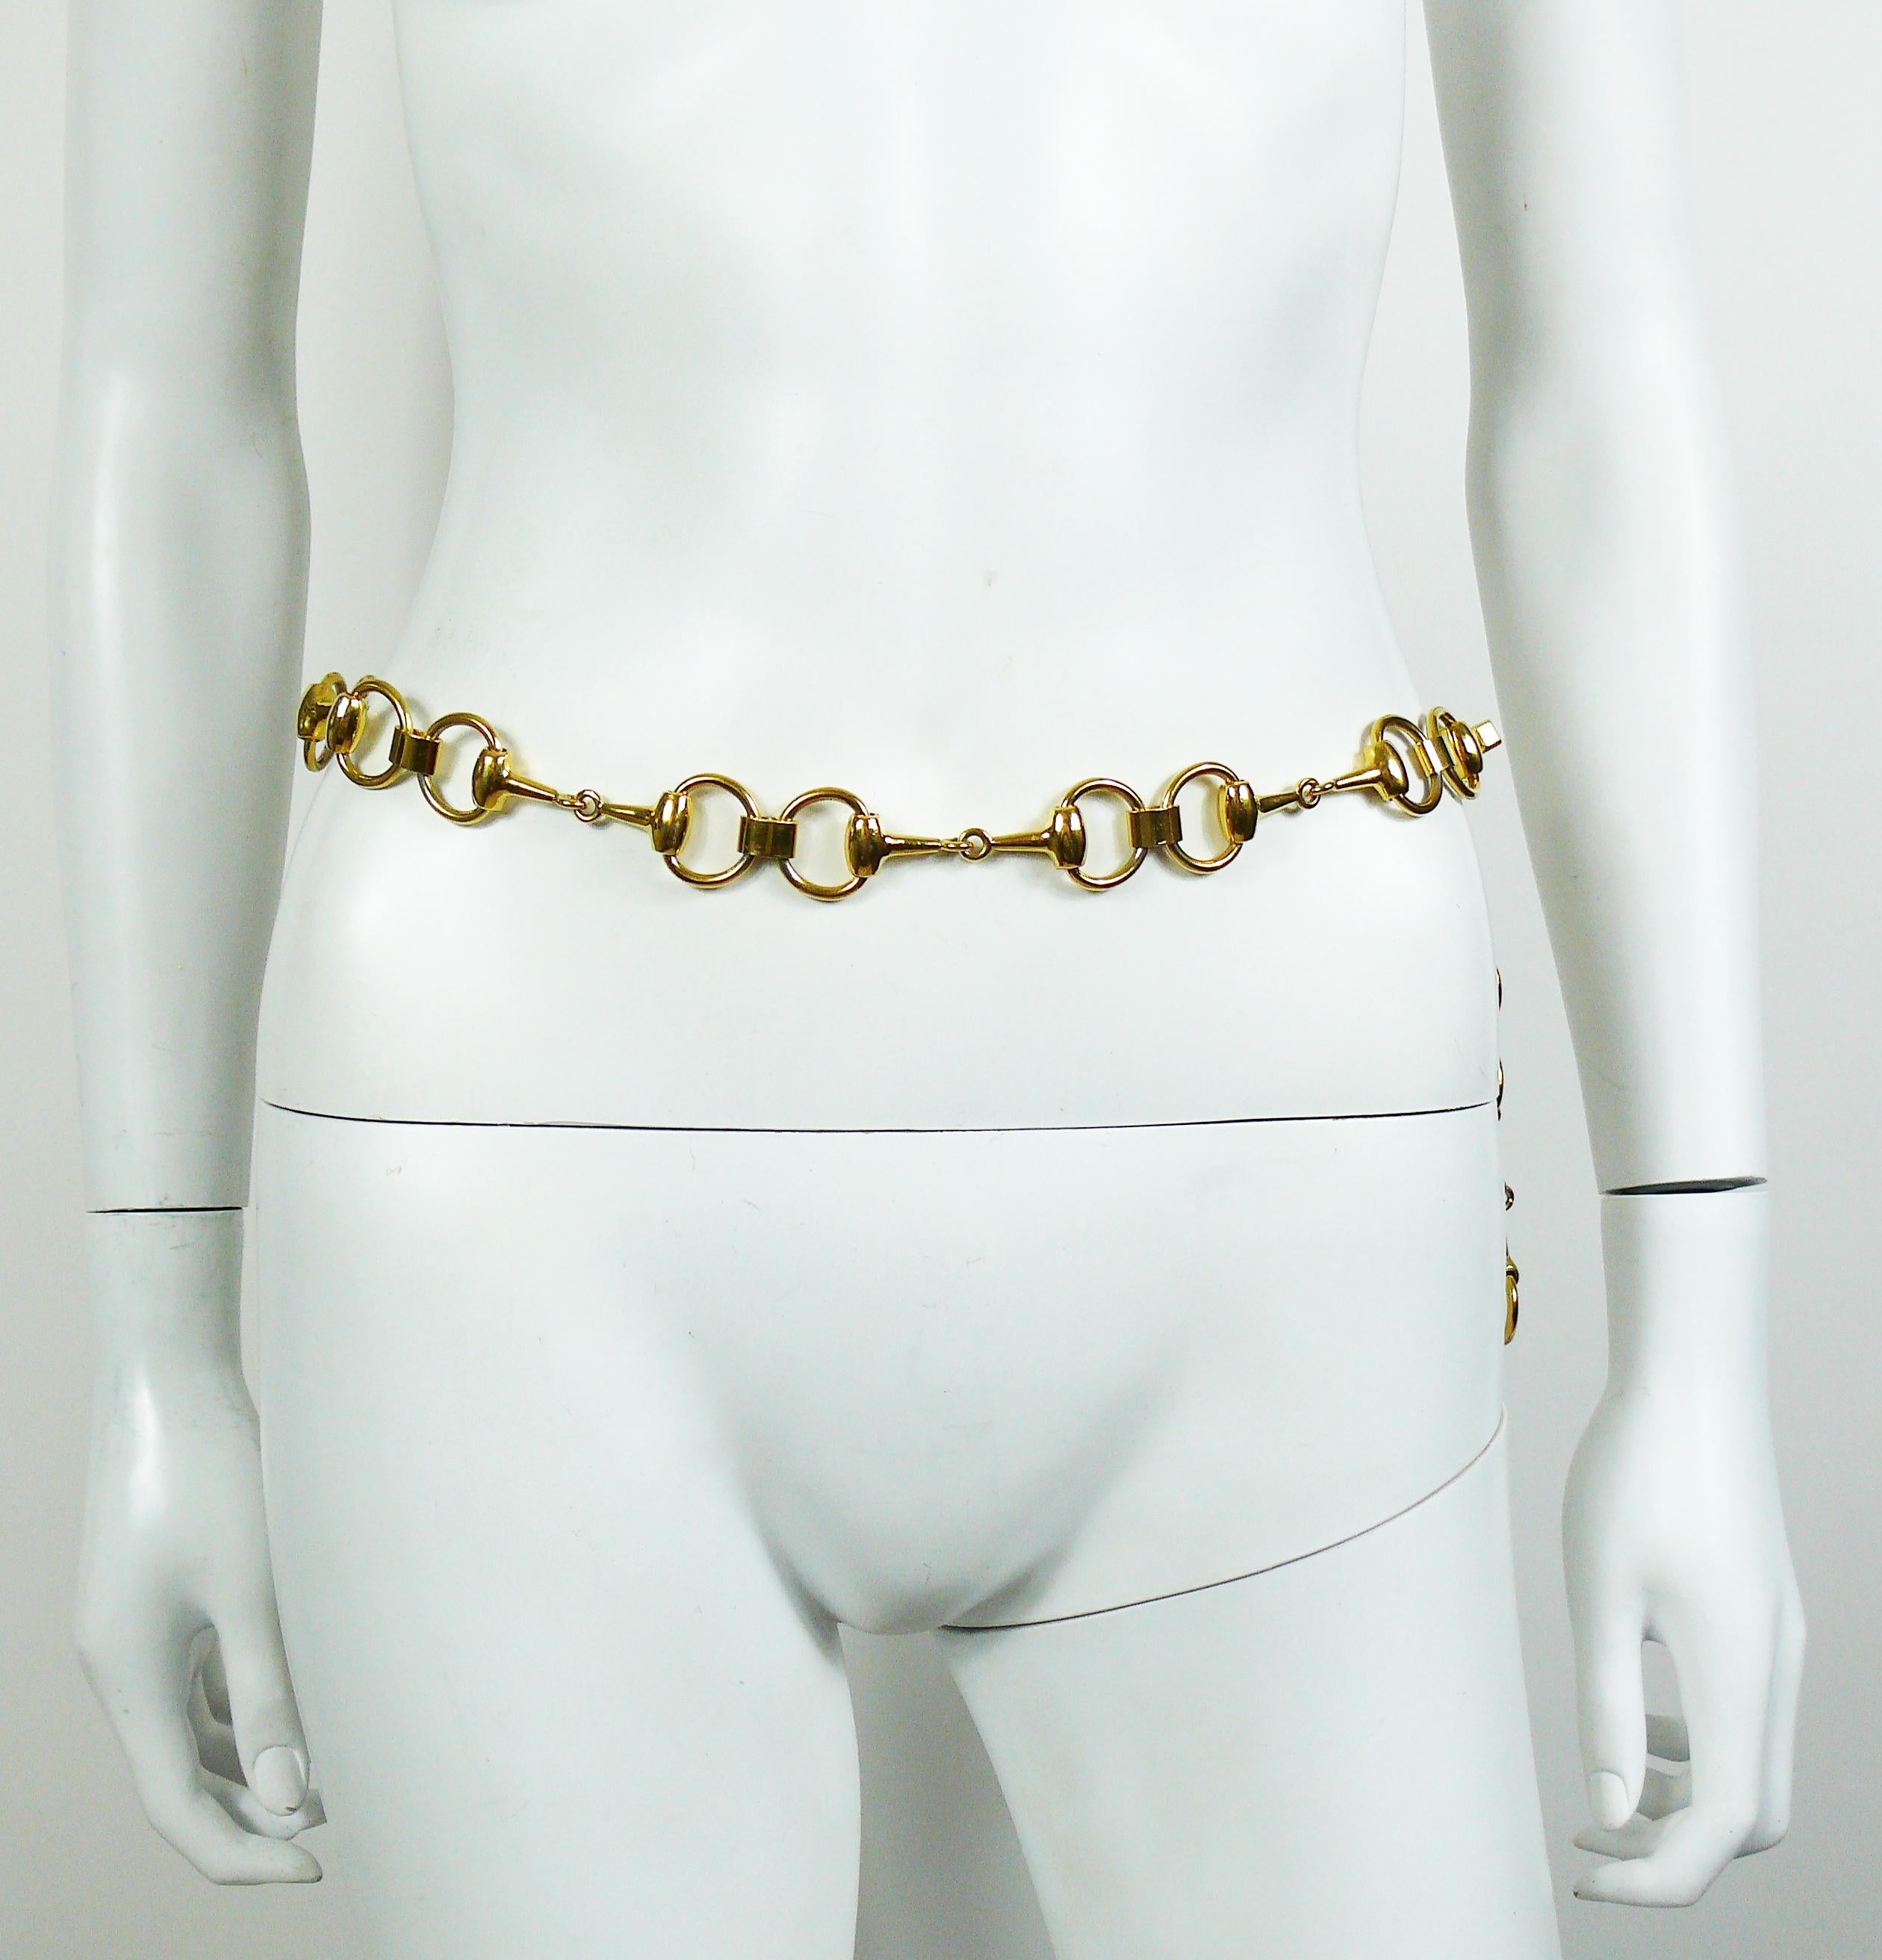 Gucci vintage gold toned horse bit design chain belt/necklace.

Adjustable length.
T bar closure featuring a nail design.

Embossed Gucci Italy.

Indicative measurements : max. length approx. 90 cm (35.43 inches) / max. width approx. 2.2 cm (0.87